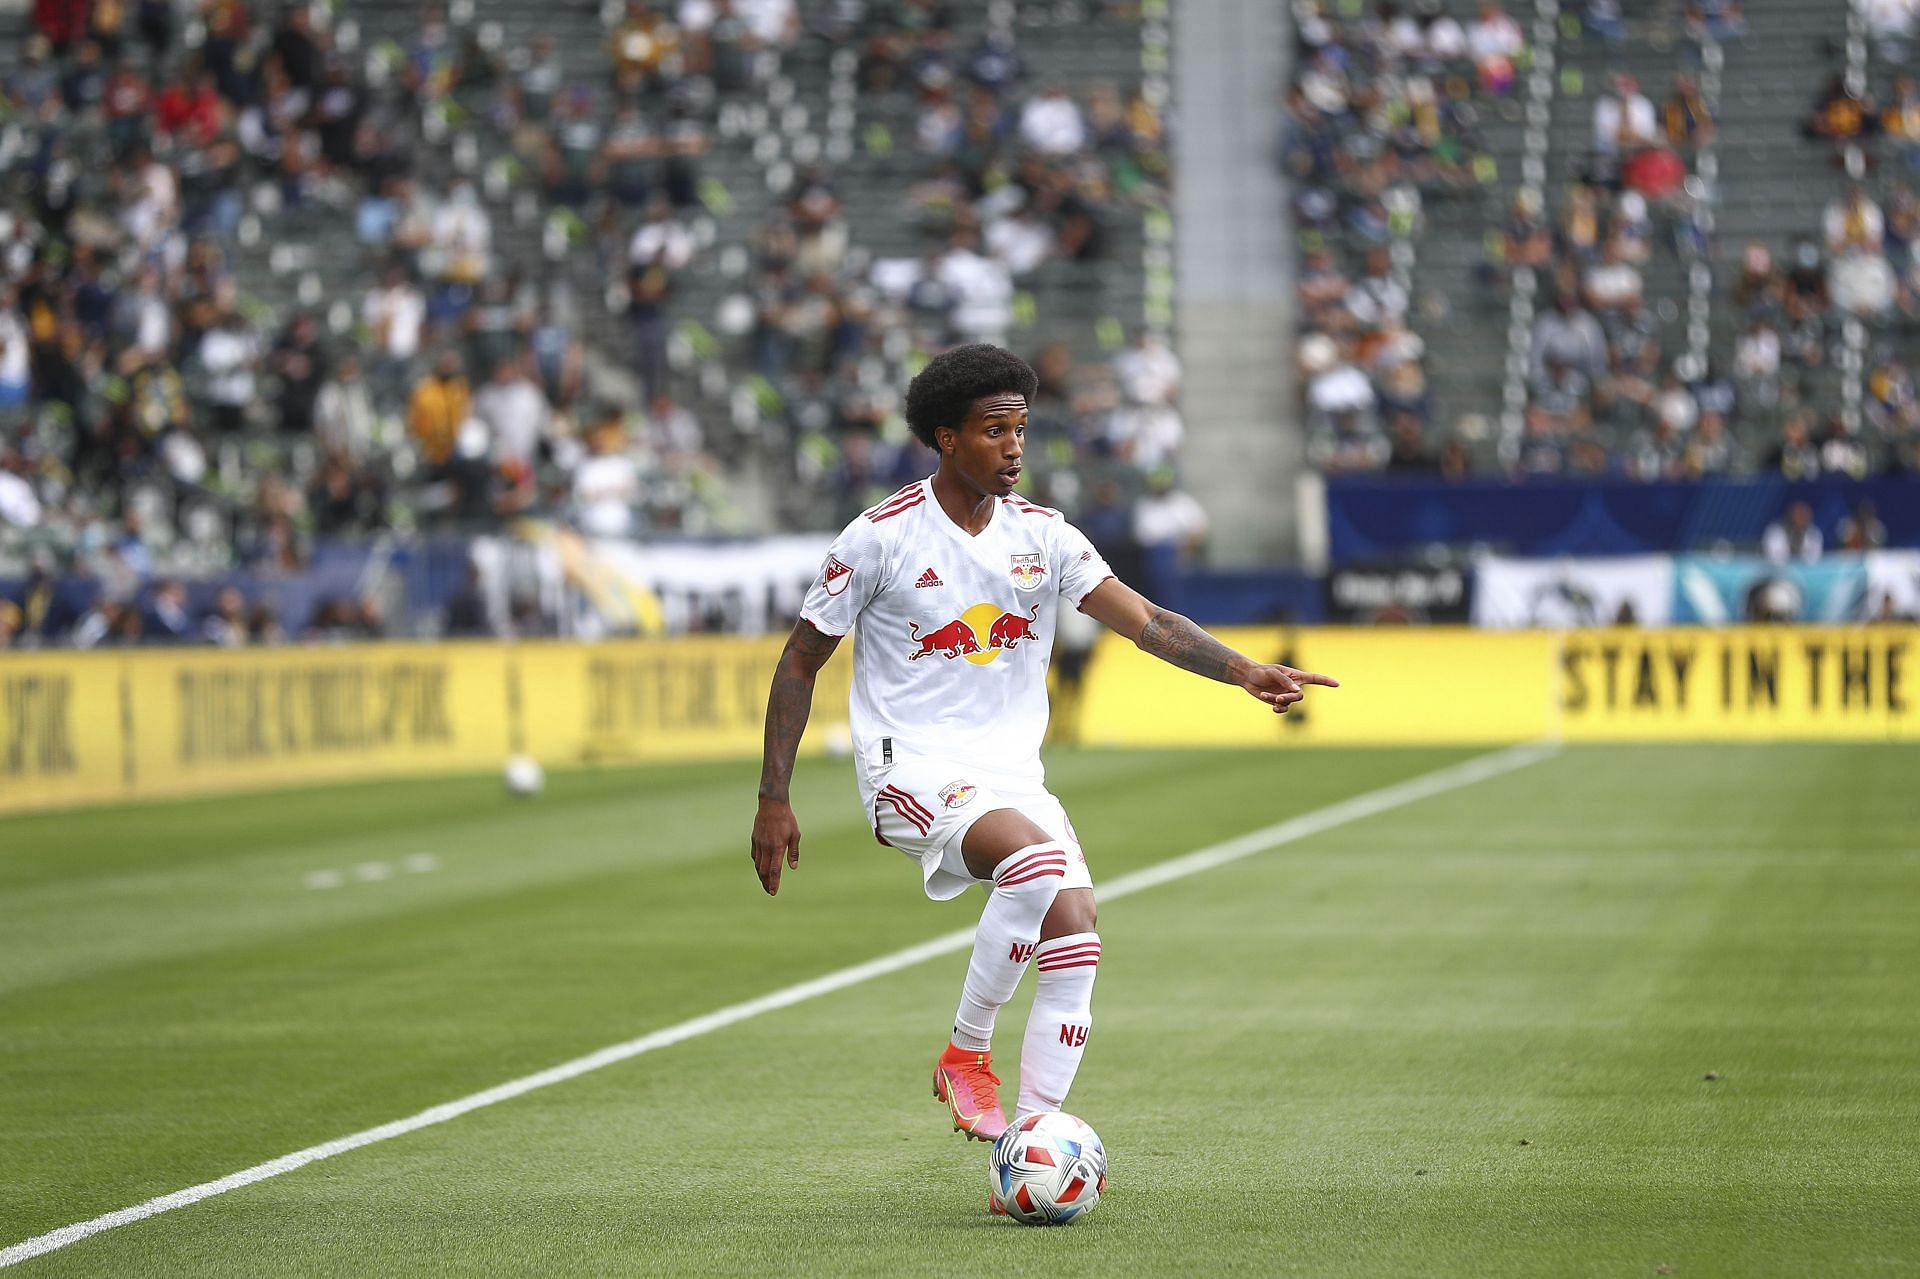 New York Red Bulls take on Orlando City this weekend